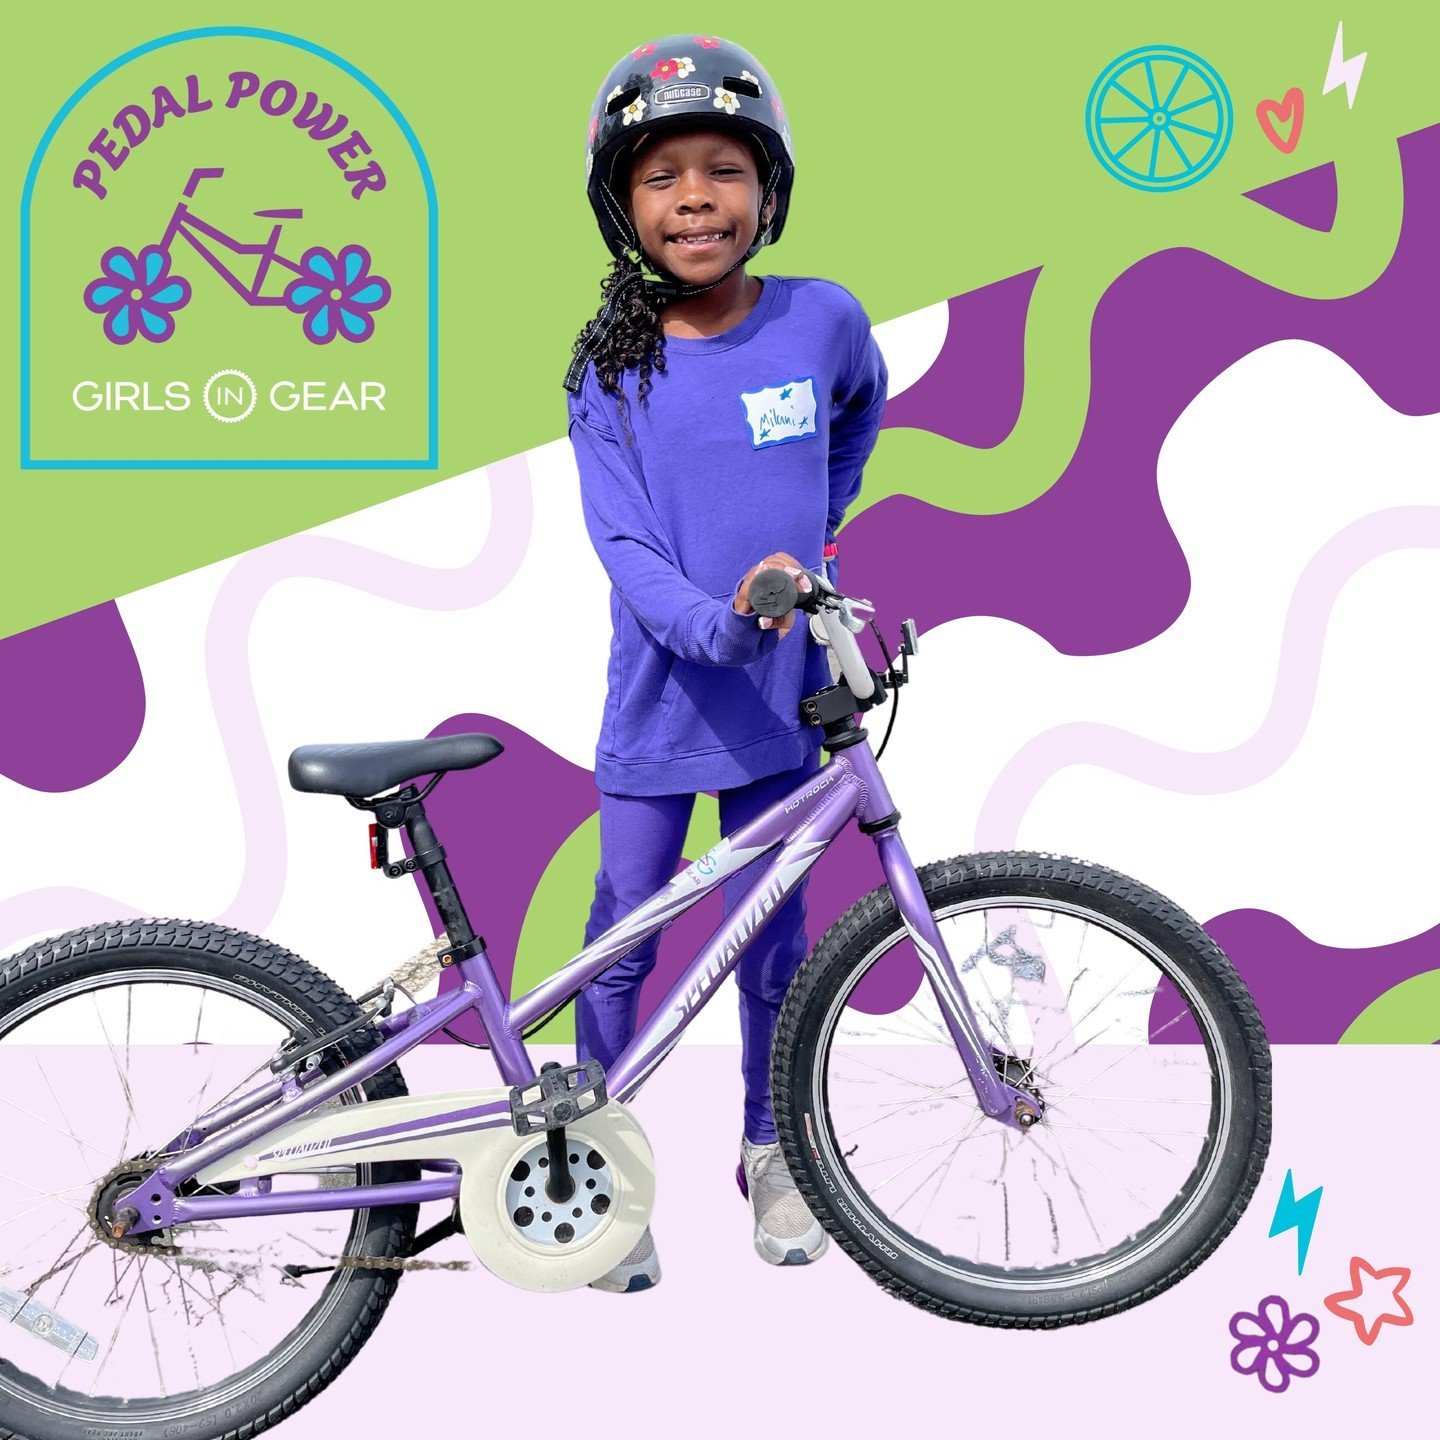 Supporting Pedal Power means more scholarships, which means more girls get to experience all the joy, exhilaration, trials, and triumphs that come with riding your bike. After that, there's no saying how far they'll go. Support us at girlsingear.org/